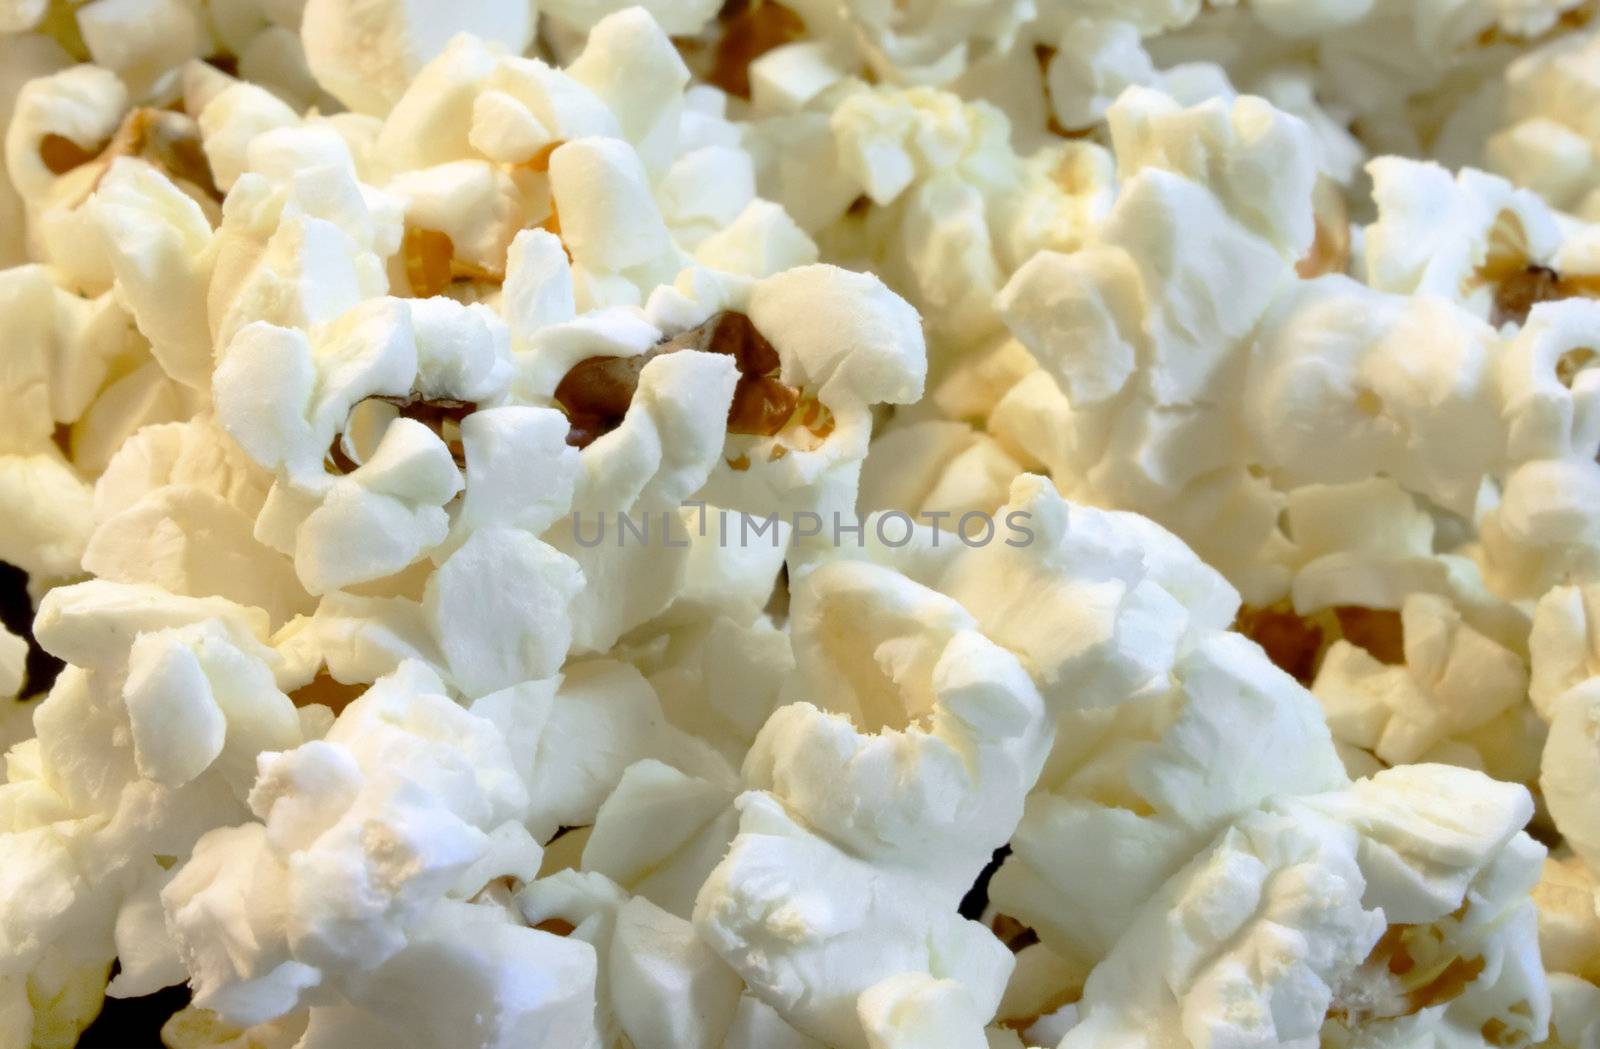 Scattered flakes of salty popcorn. Photo close-up